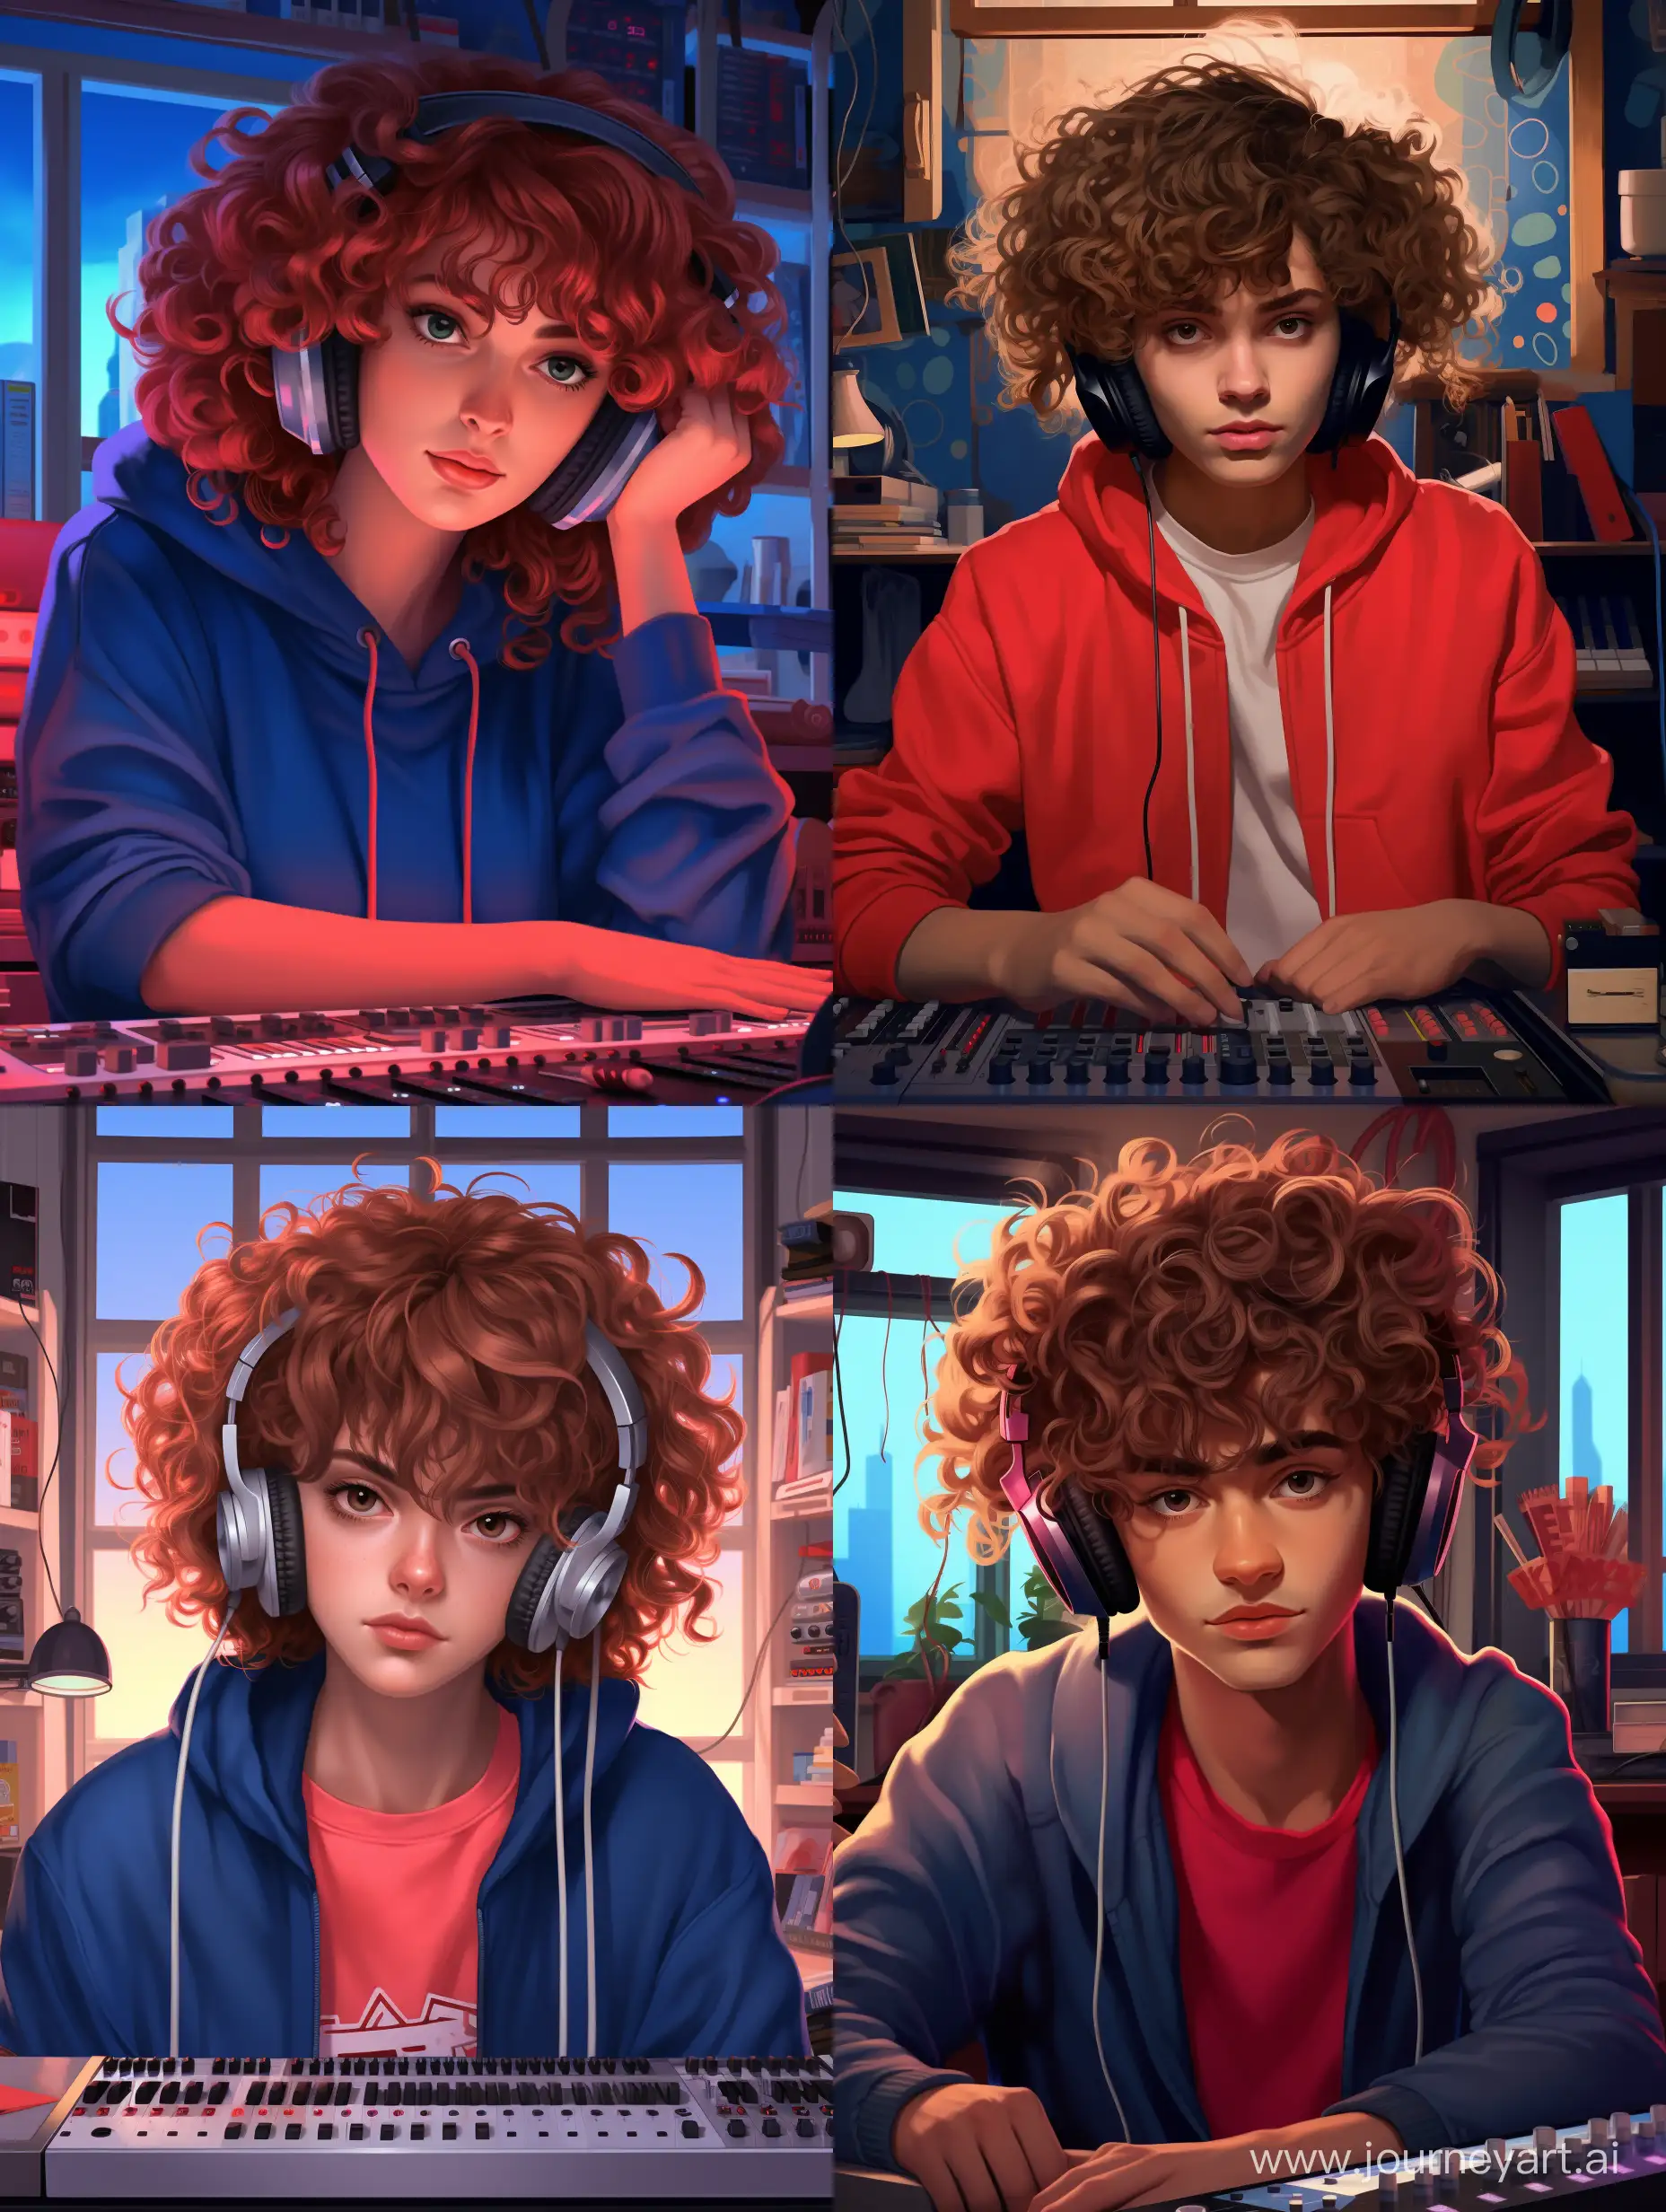 Curly Haired Beatmaker in Red Sweatshirt at Console with Blue Eyes, photo-realistic